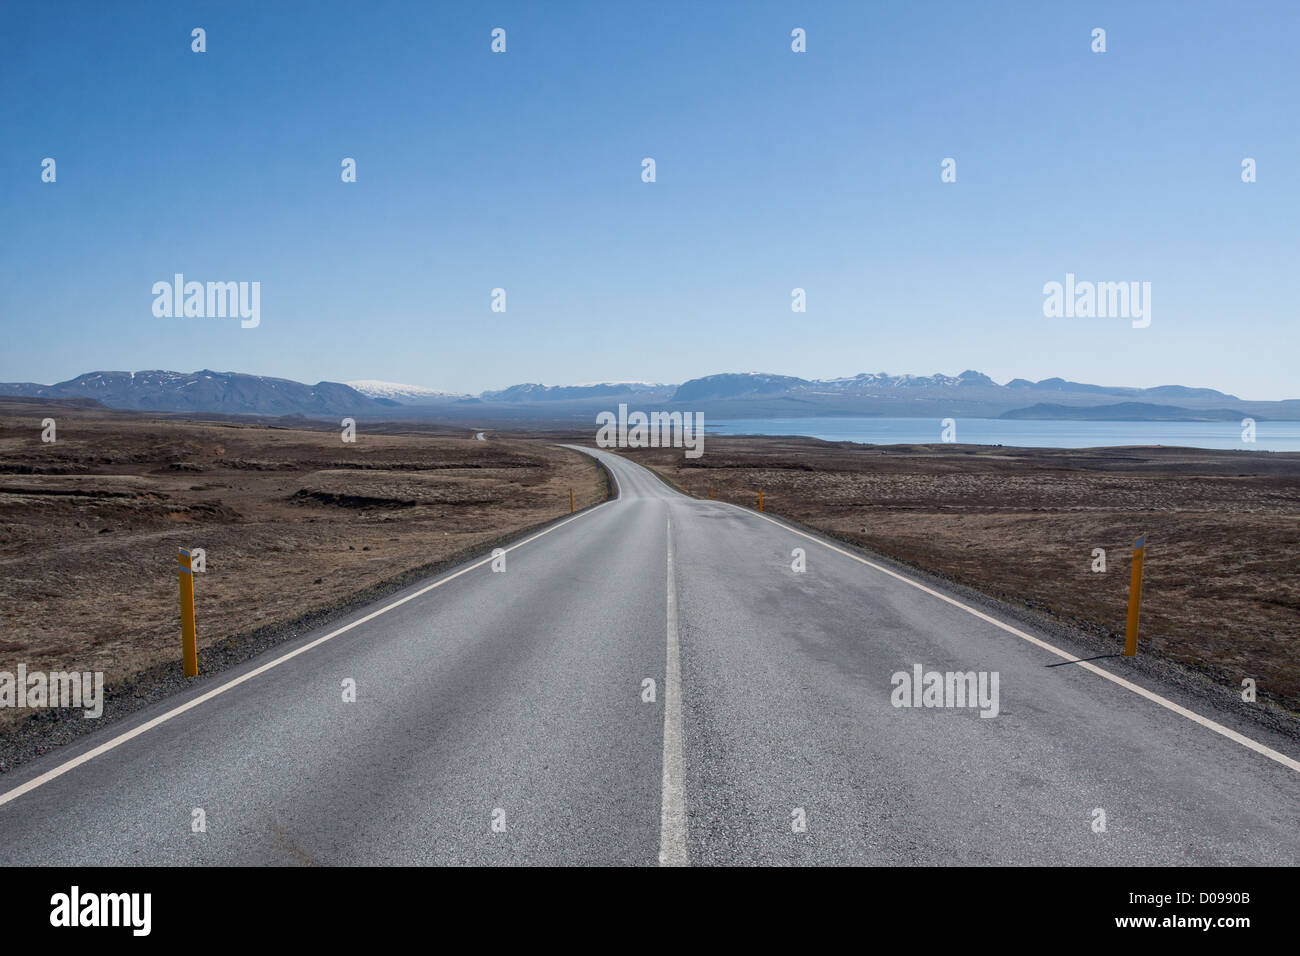 DESERTED ICELANDIC ROAD WITH THINGVALLAVATN LAKE ON THE RIGHT REGION OF THE GOLDEN CIRCLE ICELAND Stock Photo